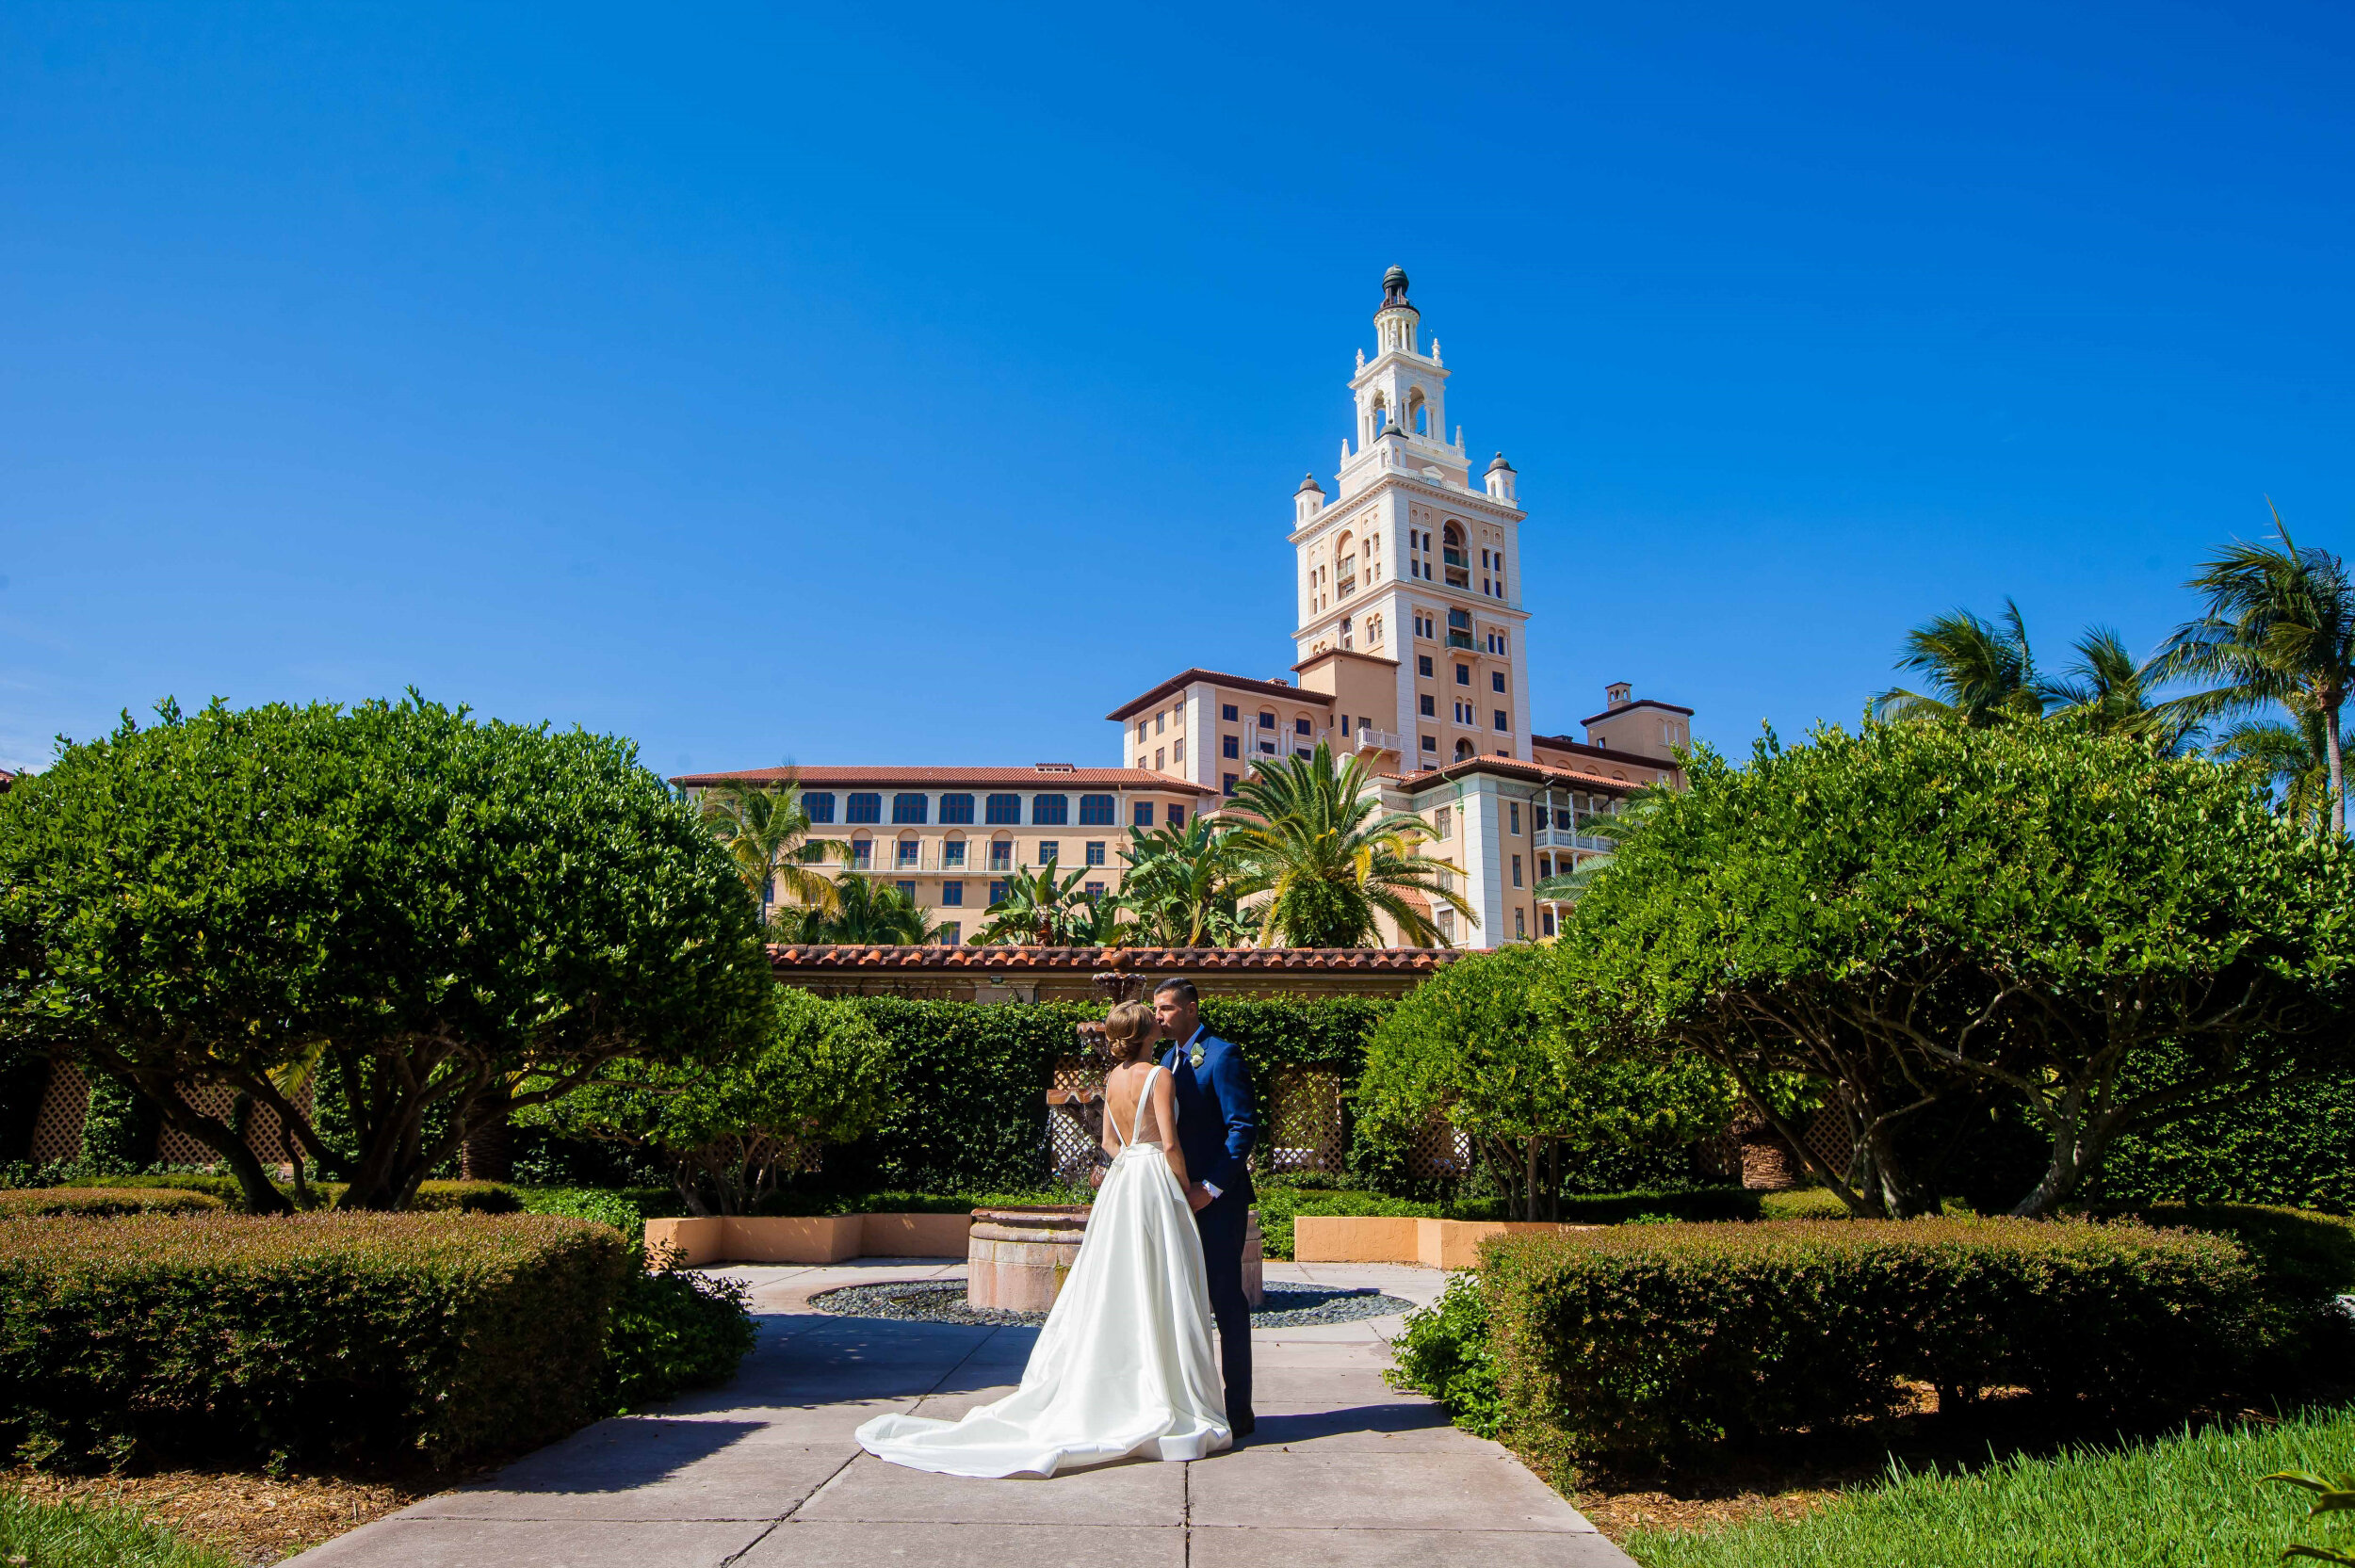 Biltmore Coral Gables - Church of the Little Flower - Wedding - Photography by Santy Martinez 8.jpg